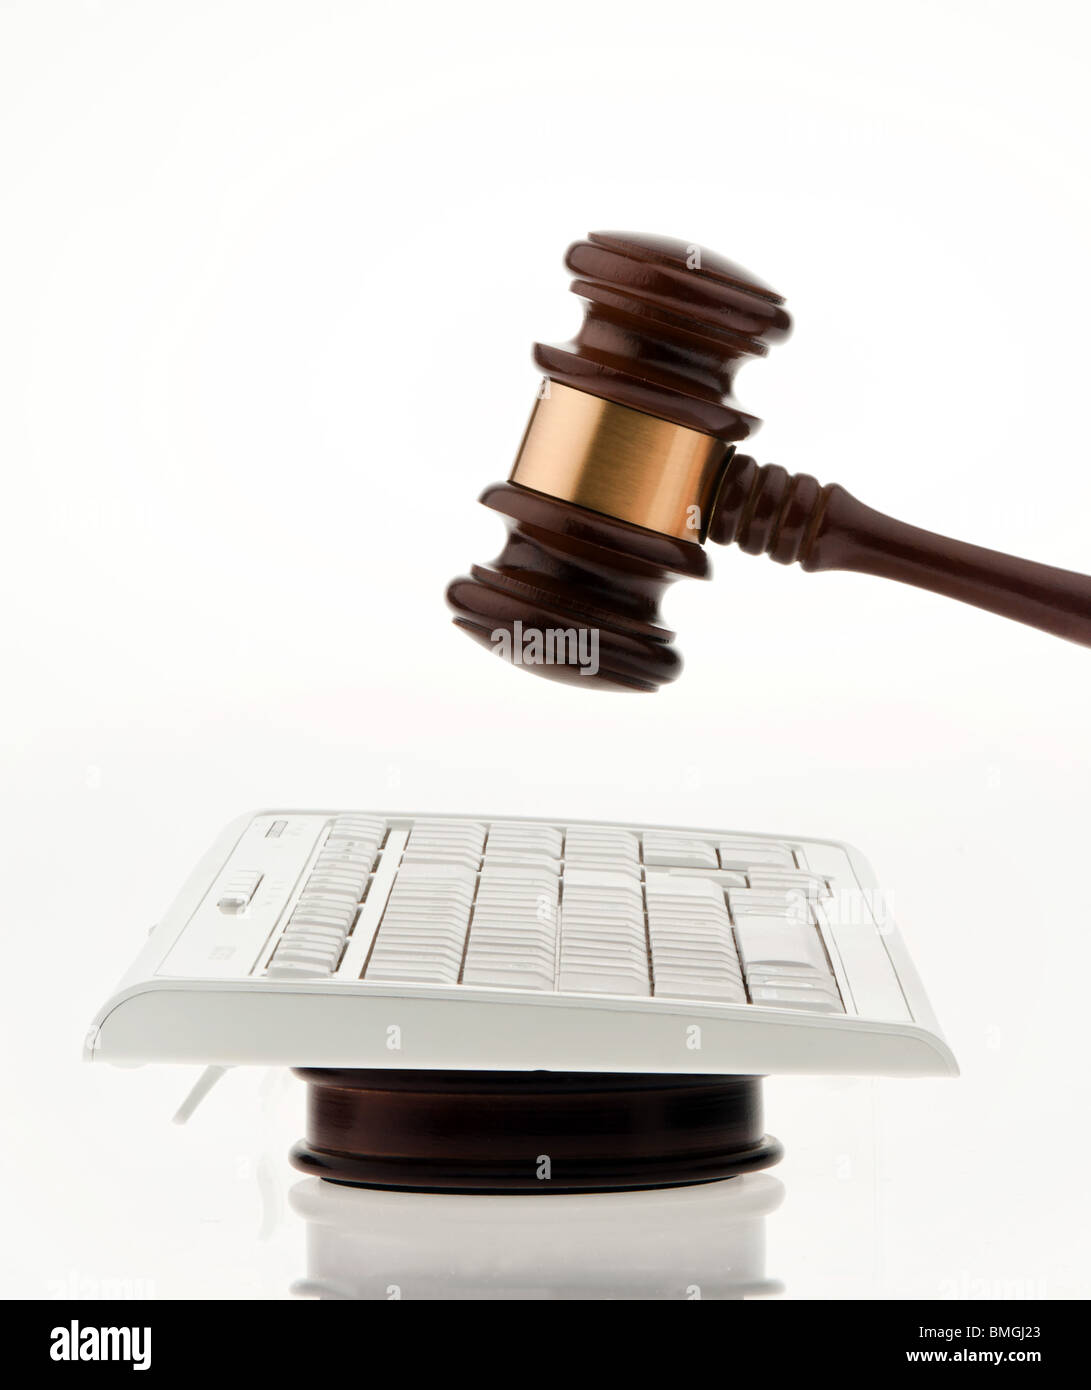 Judge hammer and keyboard. Legal certainty on the Internet. Internet auctions Stock Photo